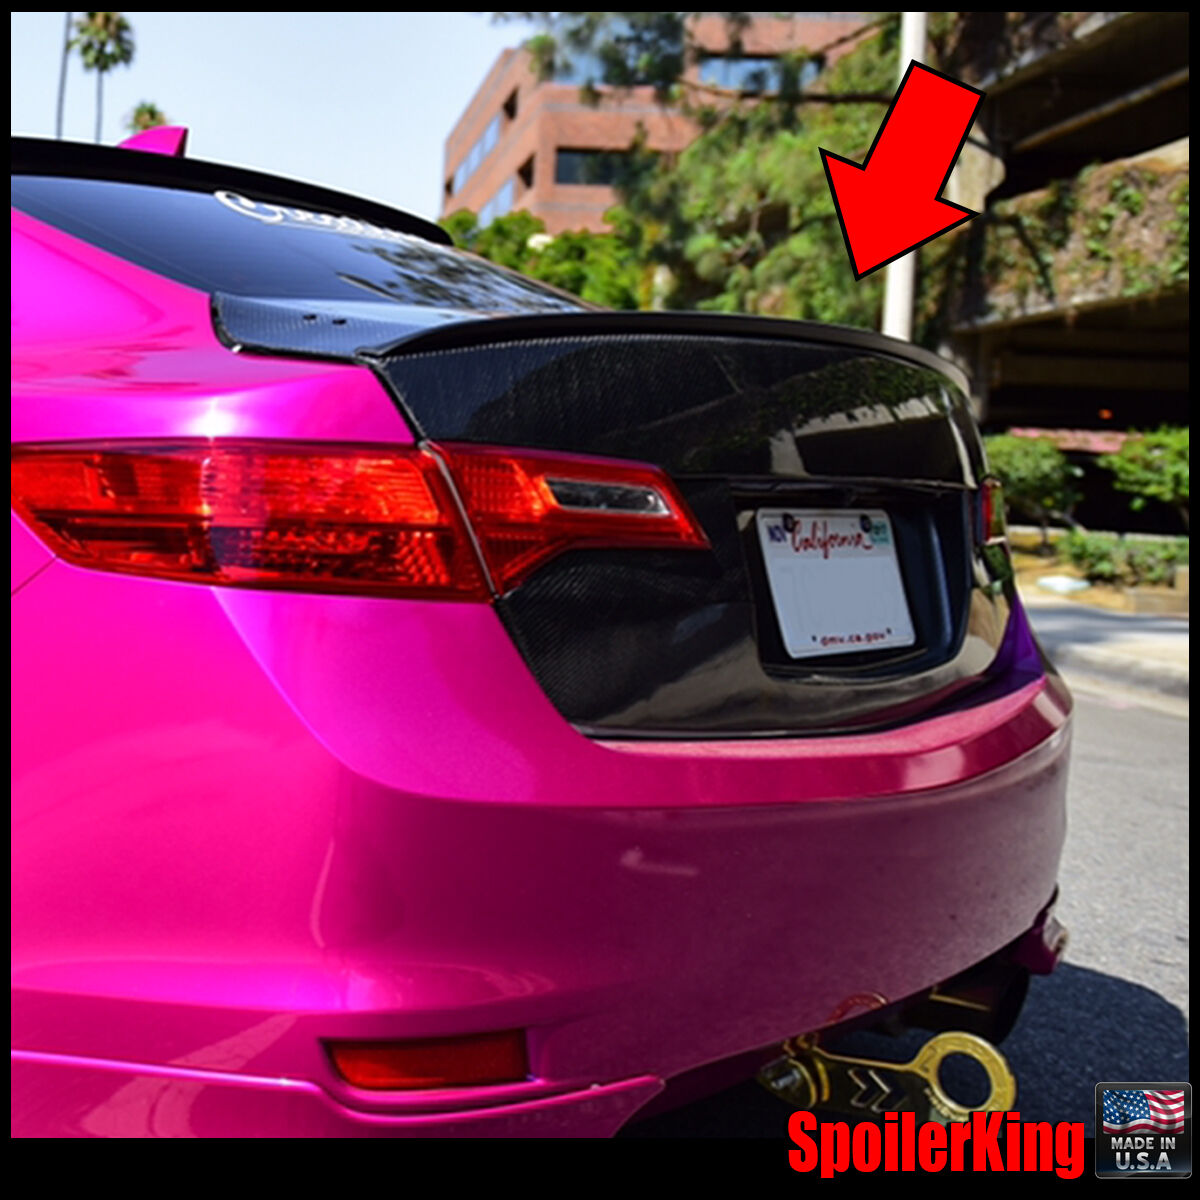 SpoilerKing 244L (Fits:Acura ILX 2013-18) Rear trunk decklid spoiler M3 wing